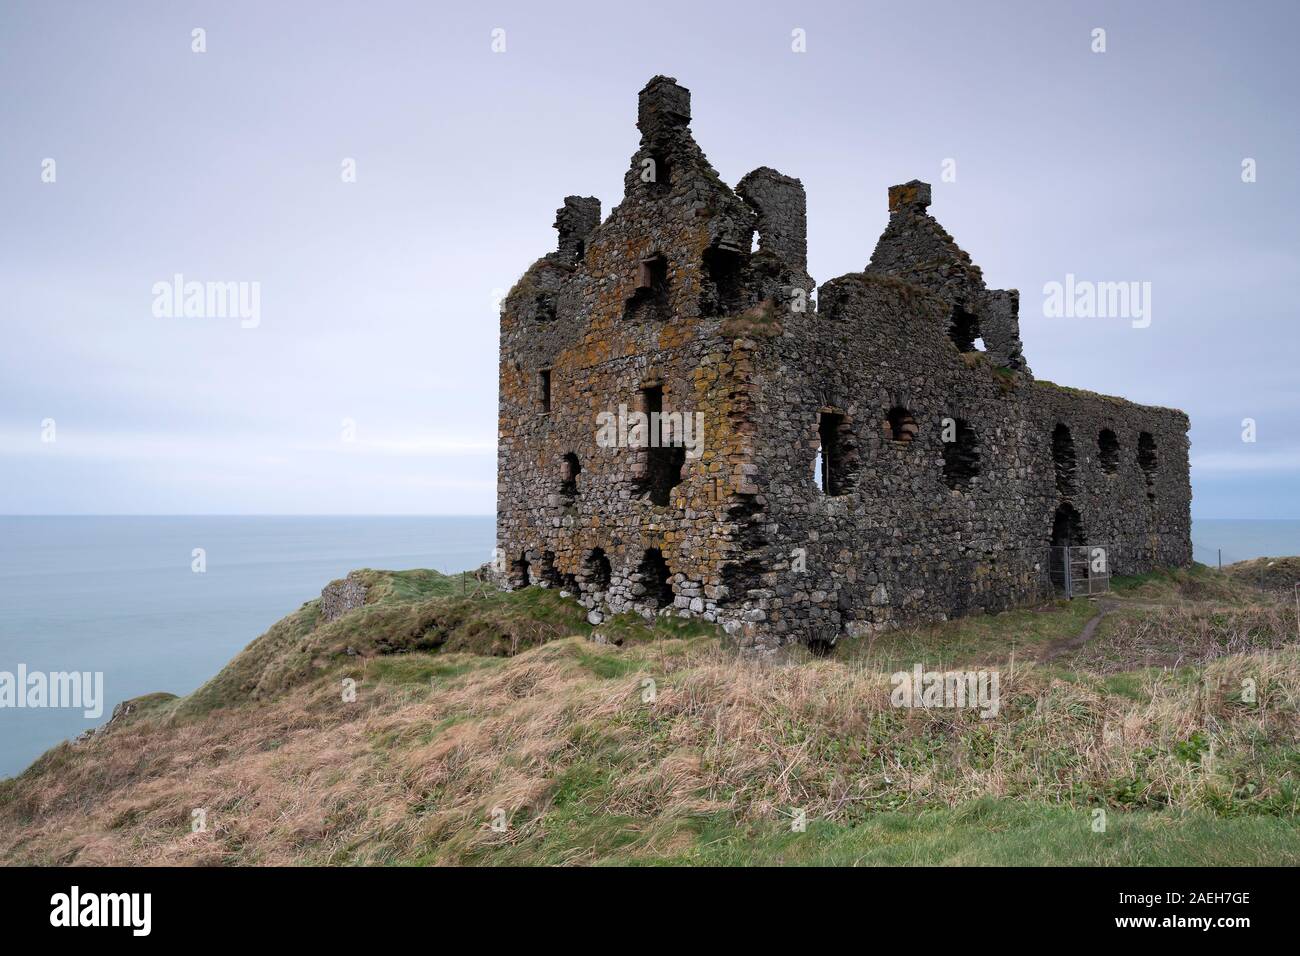 Photograph by © Jamie Callister. Dunskey Castle, located on the western coast of Scotland in South Ayrshire, South West Scotland, UK, 22nd of November Stock Photo